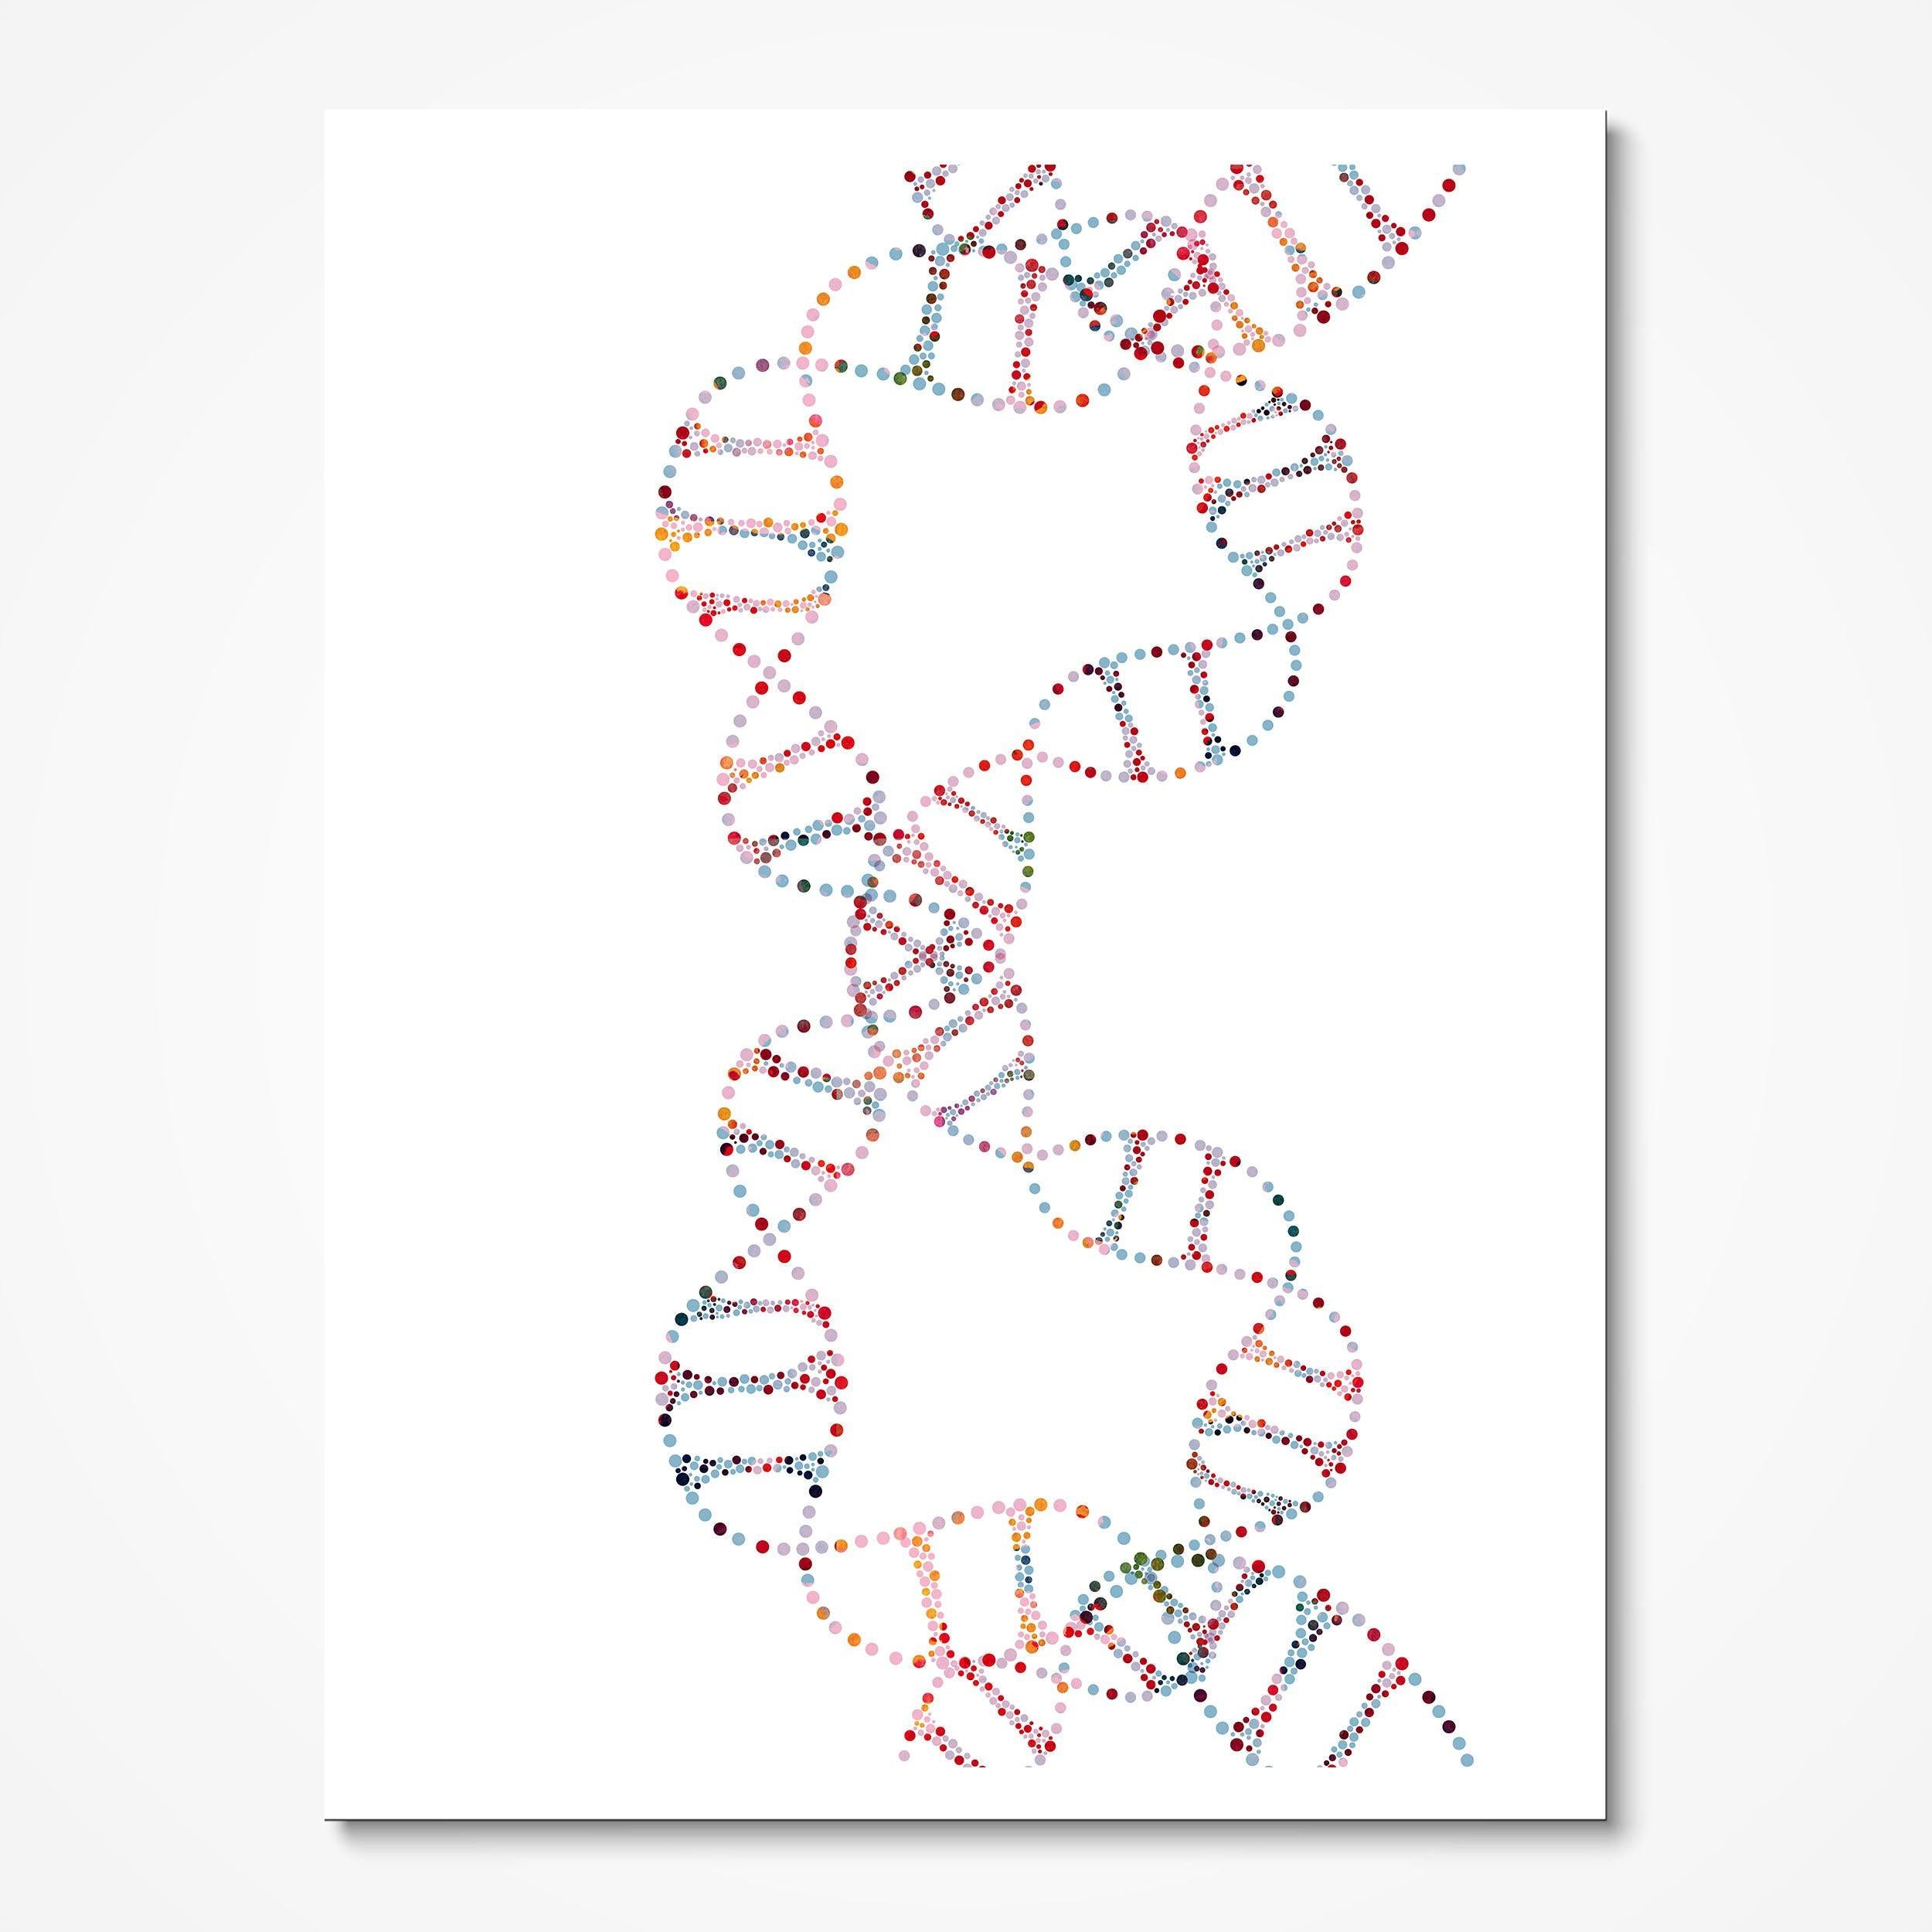 Dna Double Helix Genetics Science Print, DNA Molecule Abstract Illustration Biology Lab Wall Decor